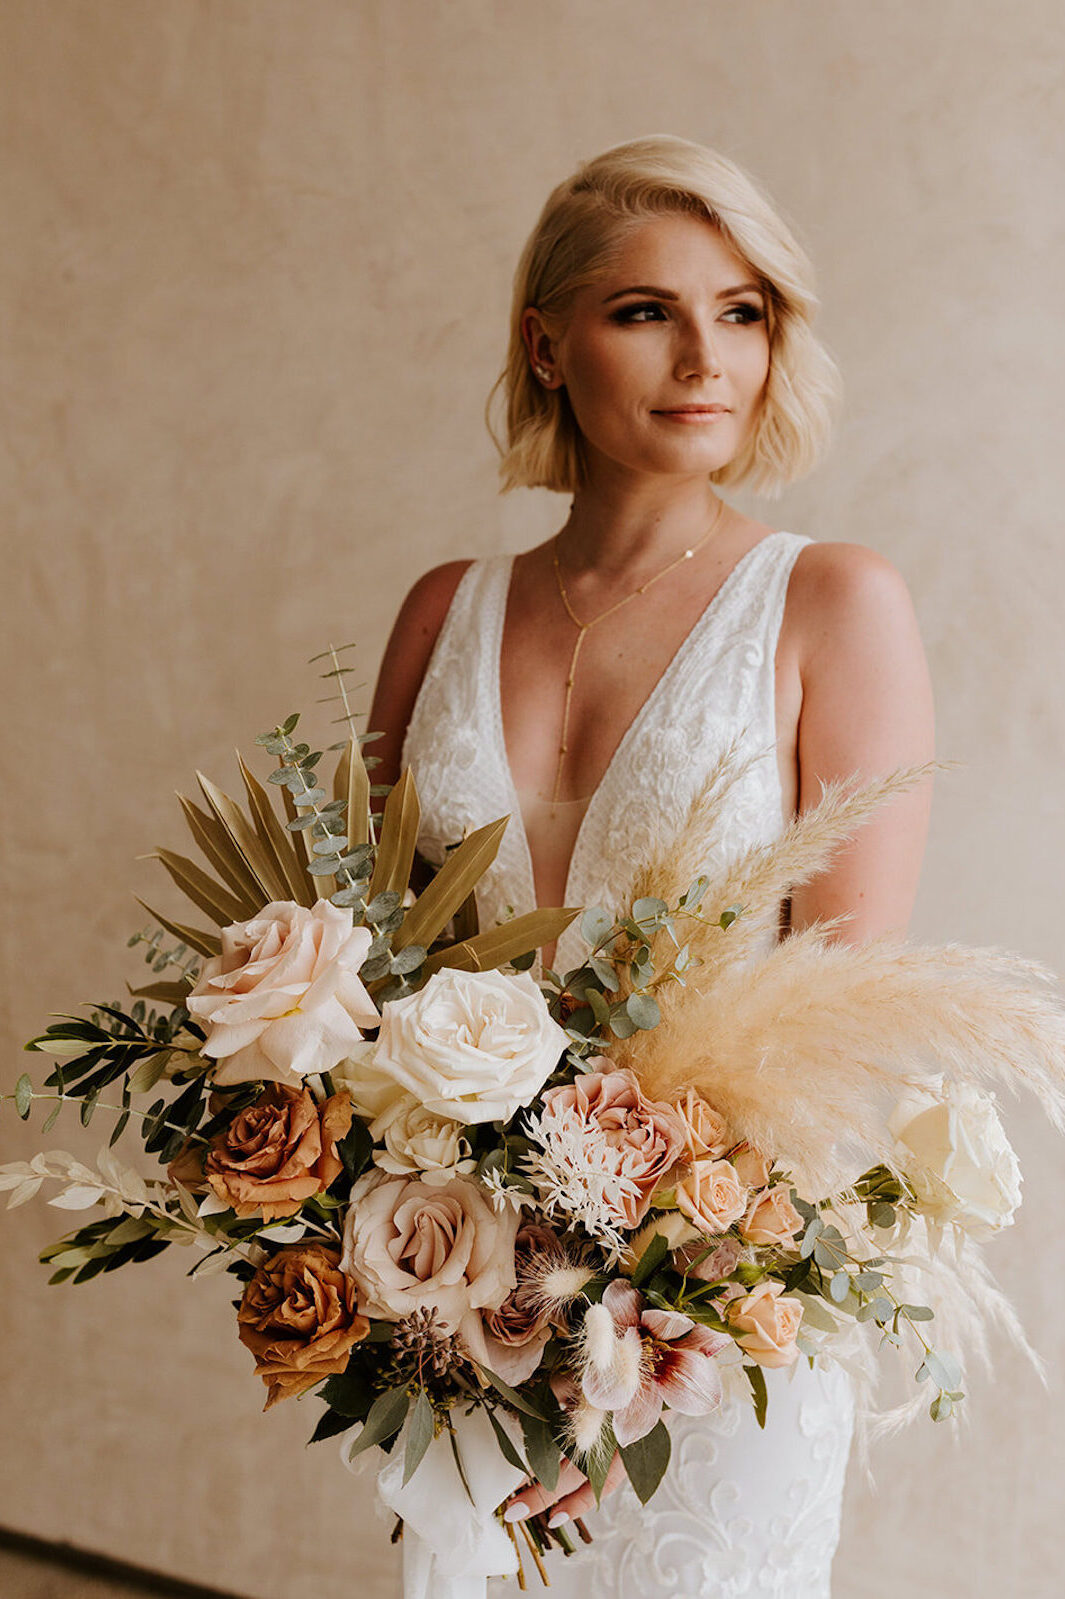 Neutral fall wedding colors Fall bridal bouquet with pampas grass  -Photographer: Tida Svy